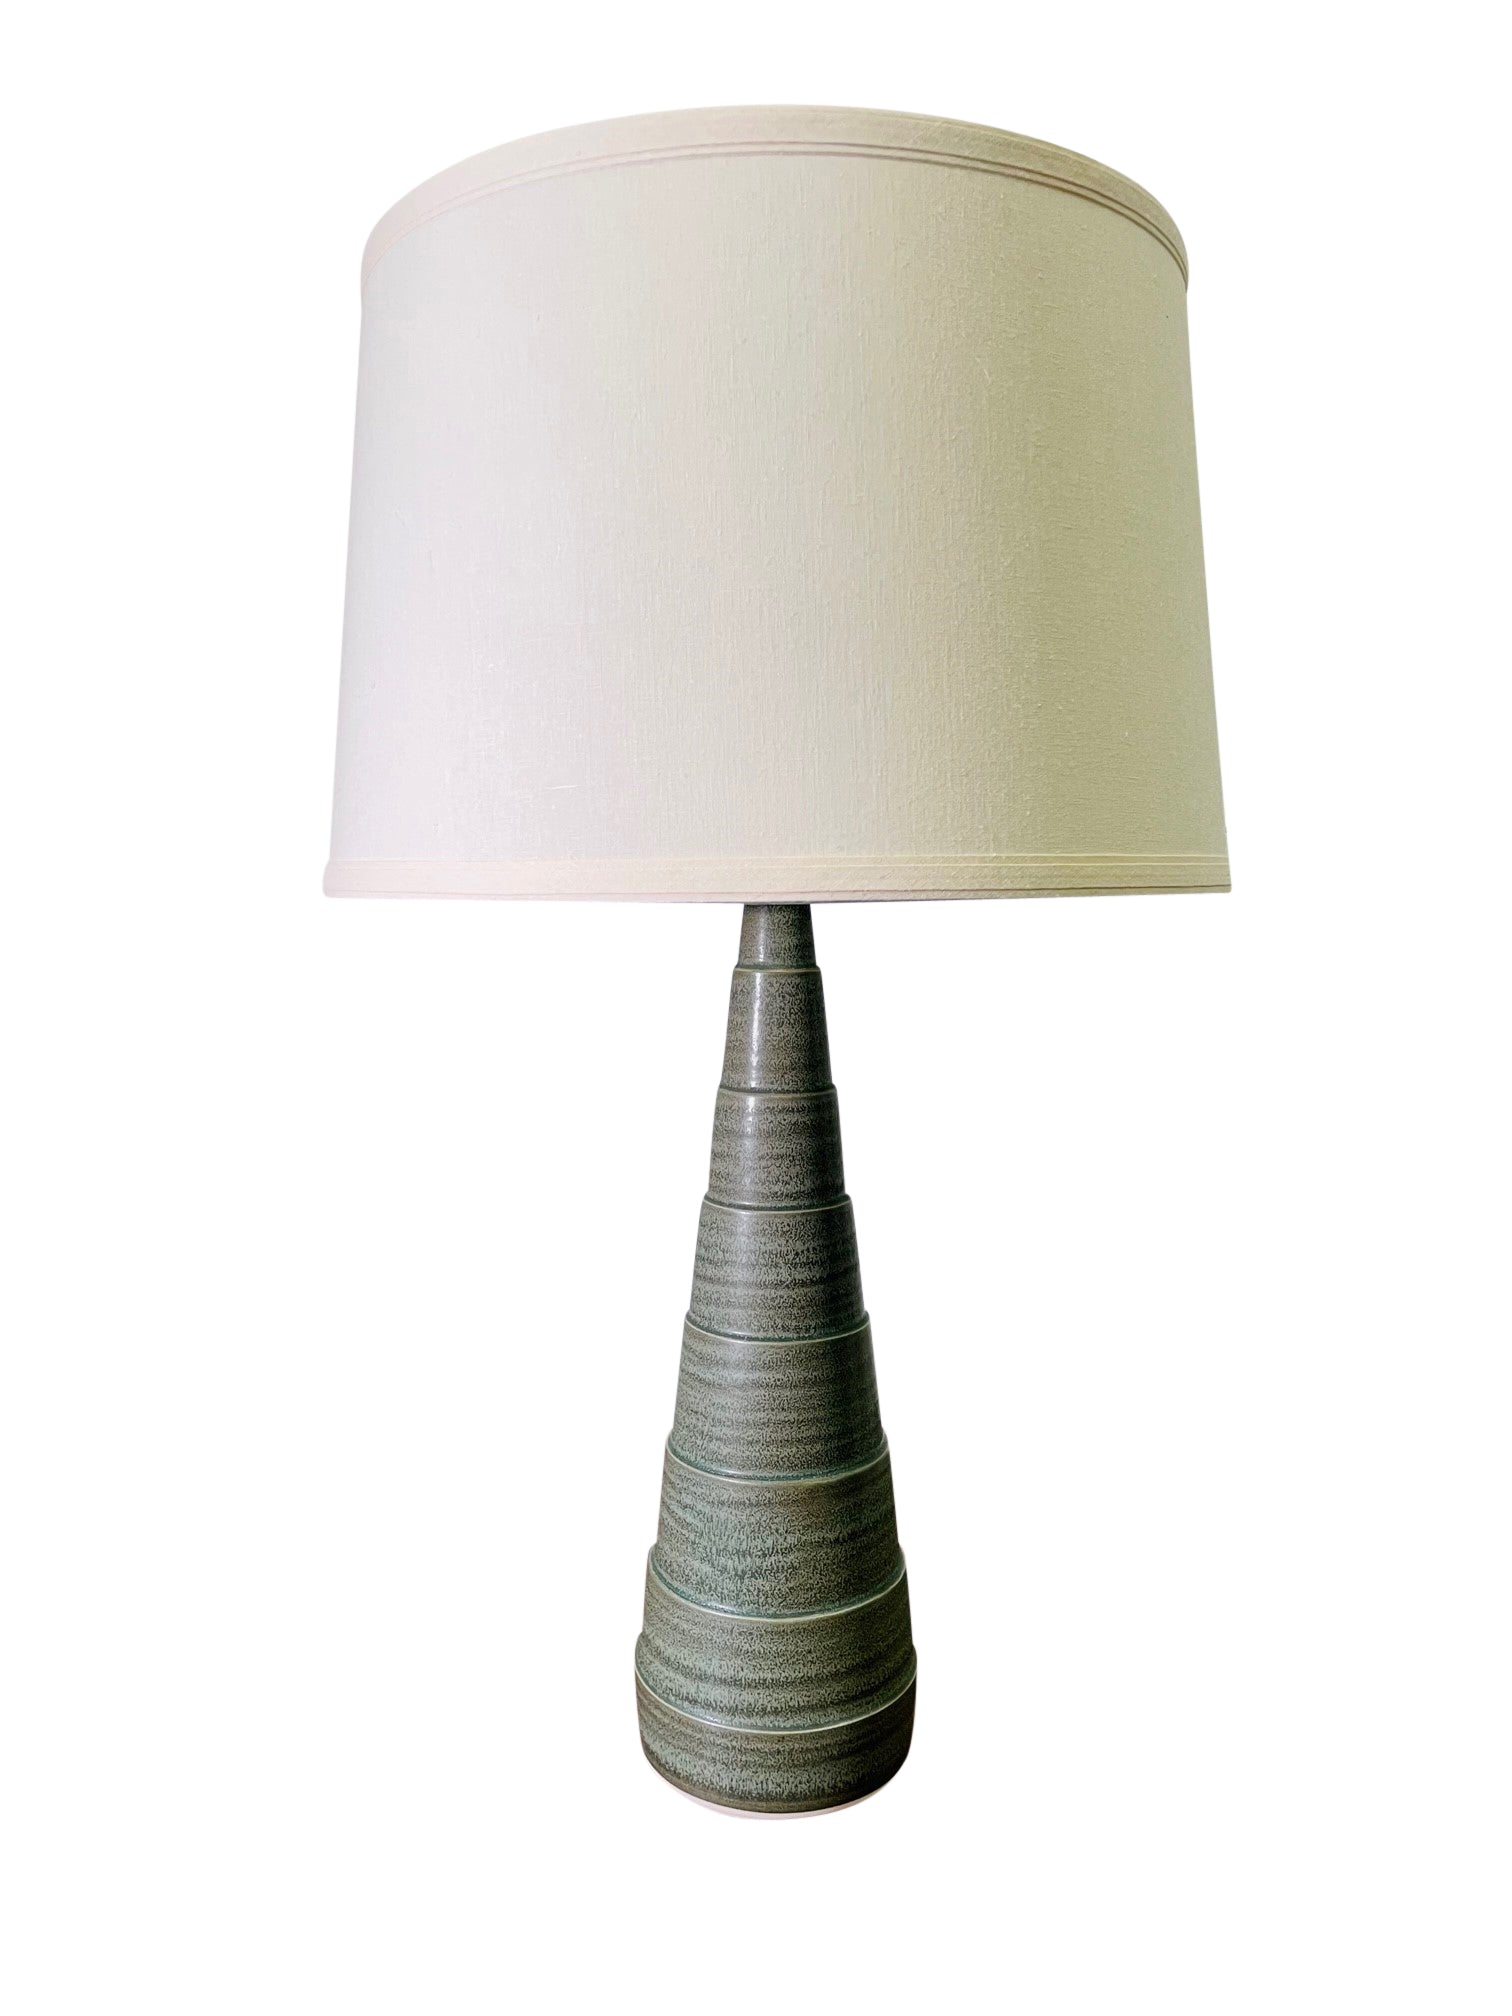 House of Troy Scatchard 26.5" Stoneware Accent Lamp in Green Matte GS826-GM